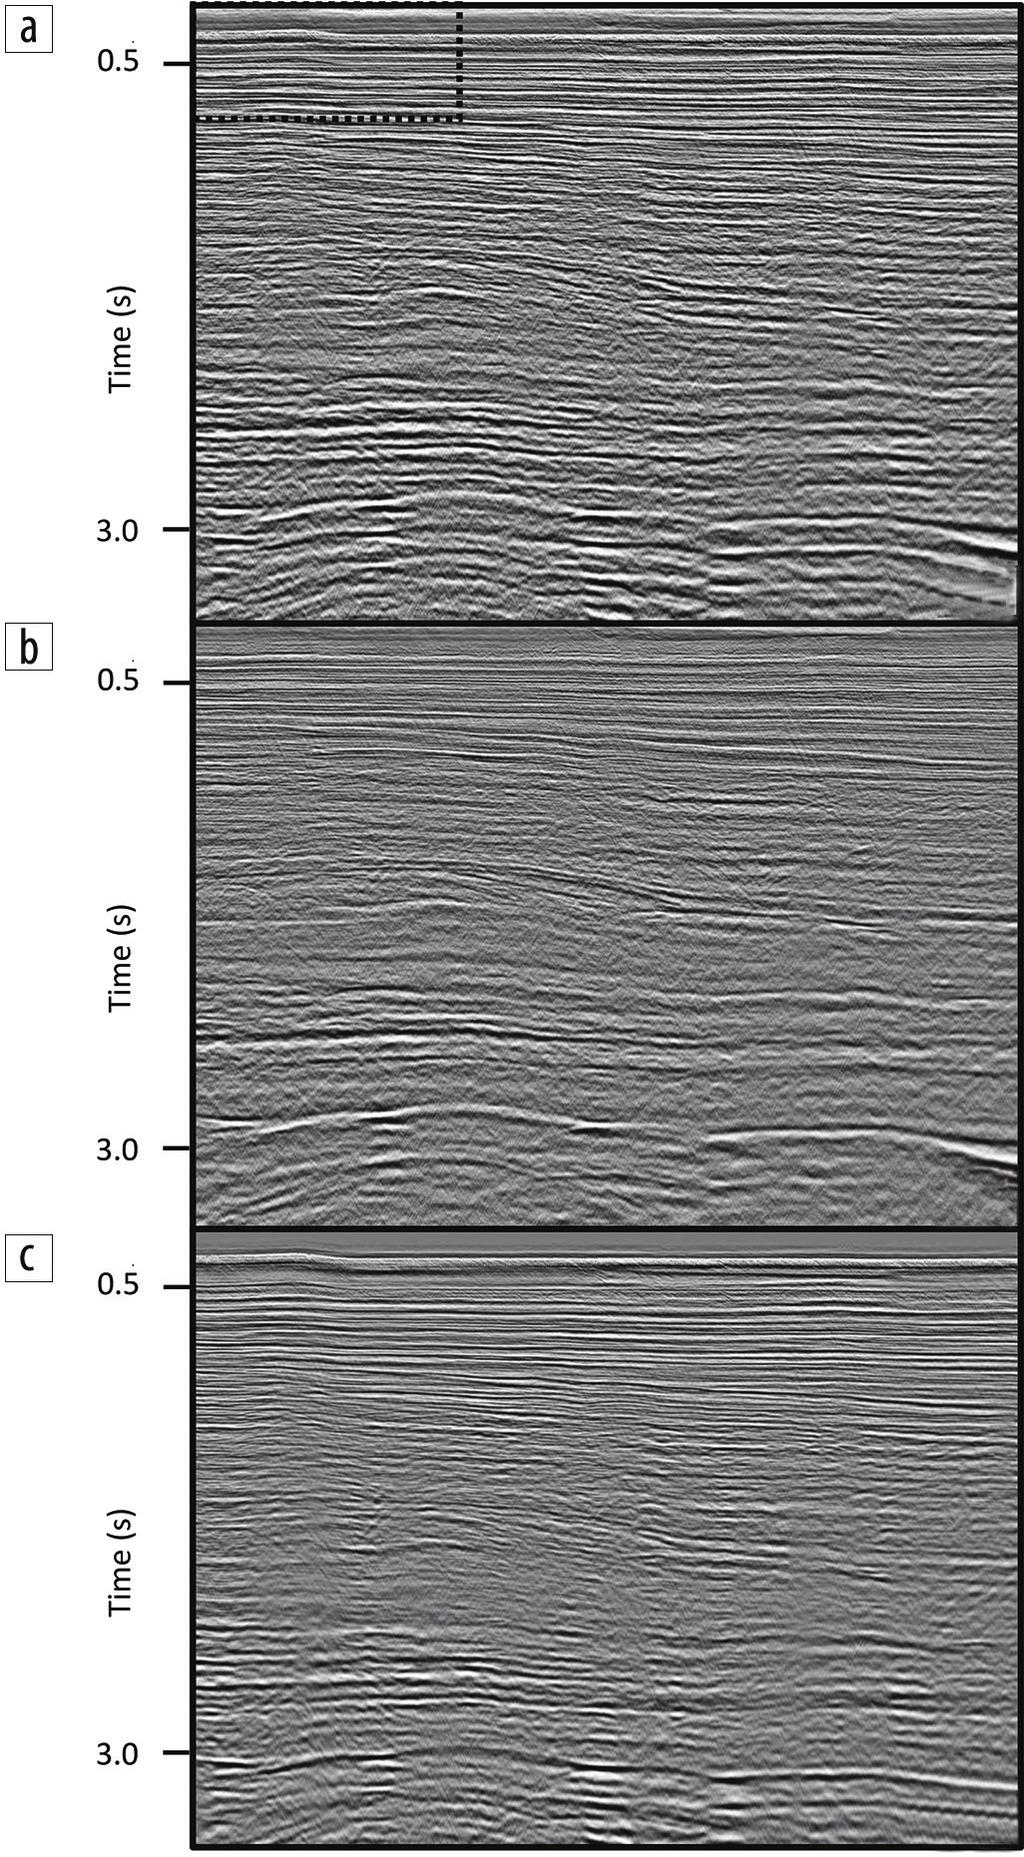 The multiples are well attenuated on the GDWD stack, from shallow to deep parts of the section (Figure 7b), with no attenuation of primaries noted on the difference section (Figure 7c).